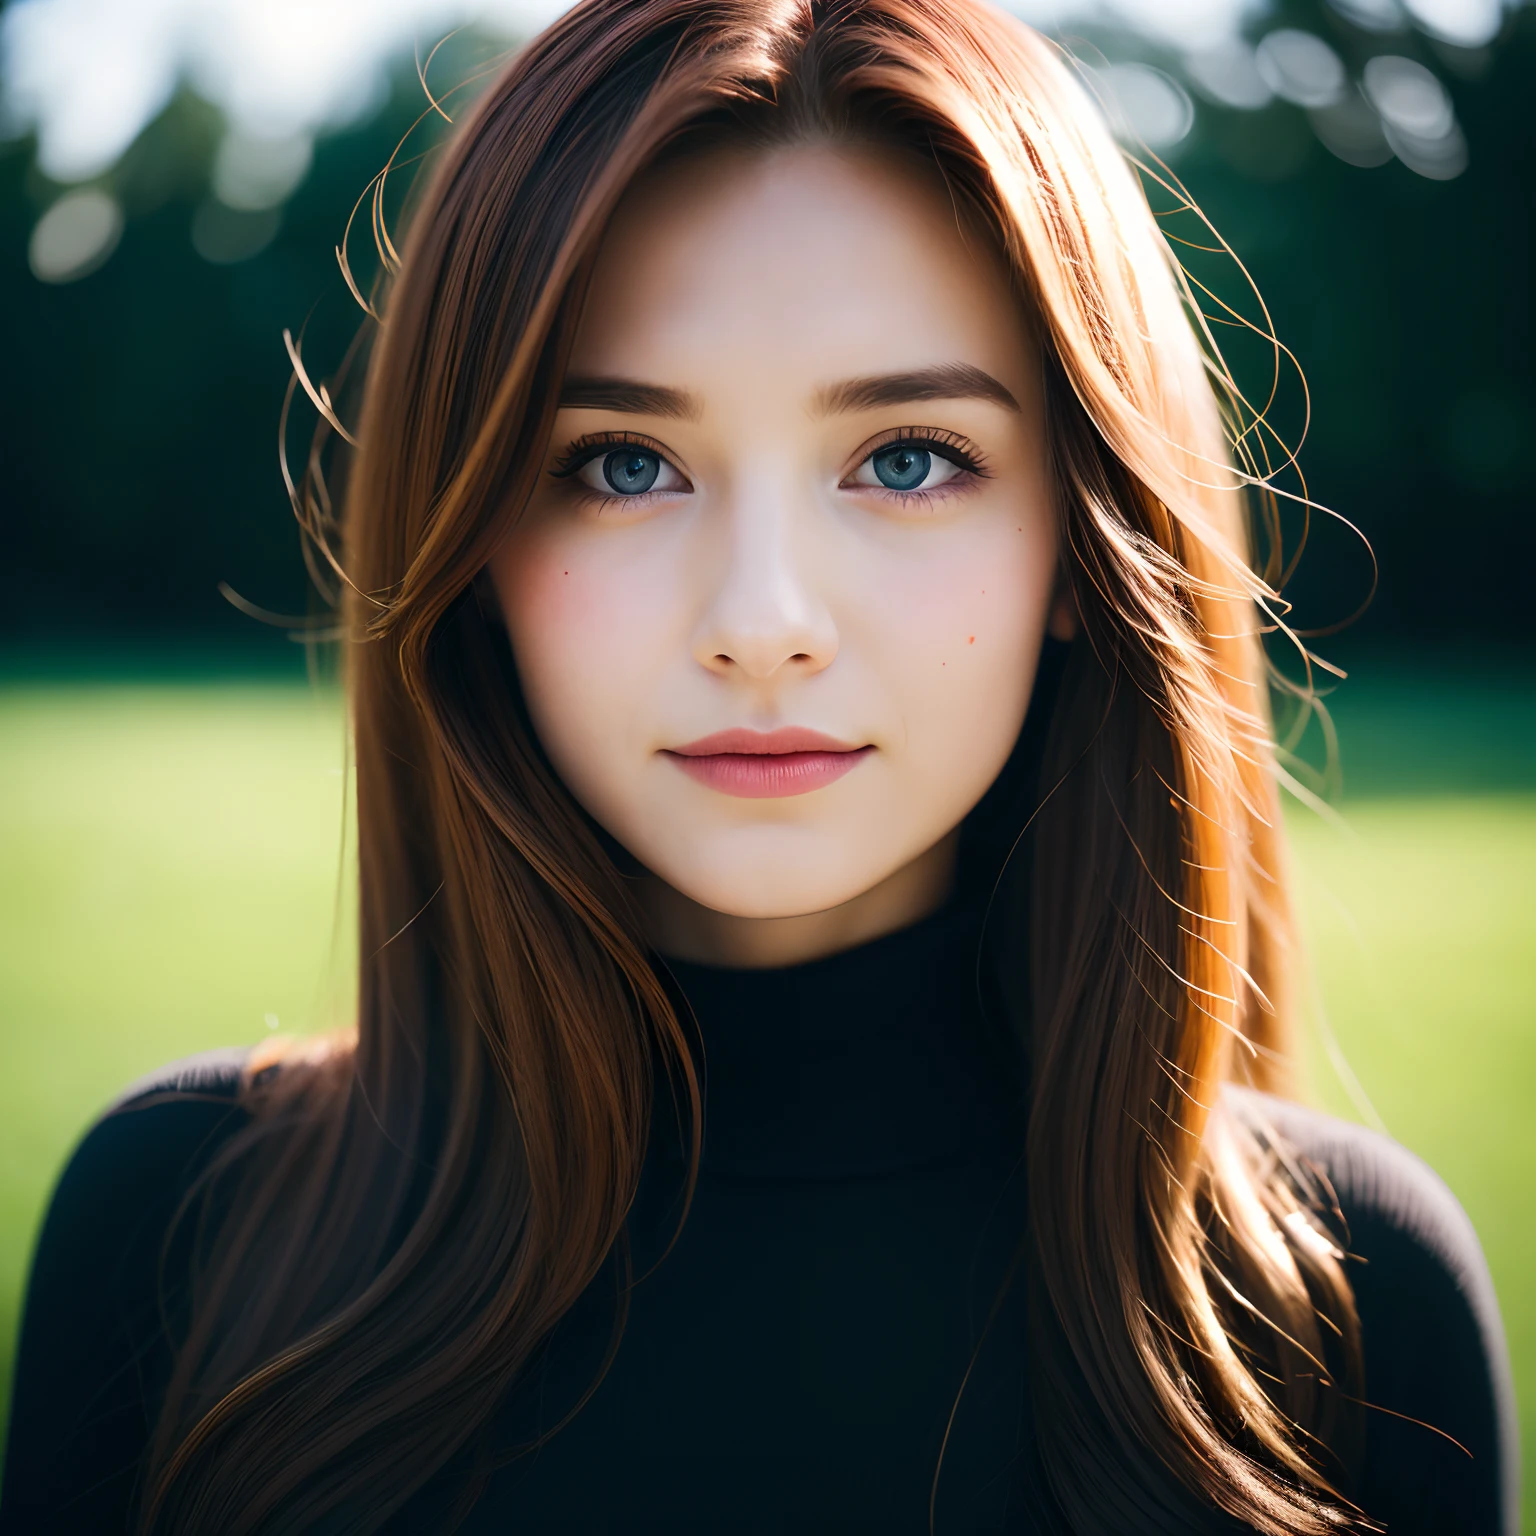 detailed and realistic close portrait of 1girl, 18 year old, blue eyes, red_hair, long_hair, closed_mouth, lips, smile, long_hair, looking_at_viewer, wearing a black sweater, turtleneck, shot outside, soft natural lighting, portrait photography, magical photography, dramatic lighting, photo realism, ultra-detailed, intimate portrait composition, Leica 50mm, f1. 4